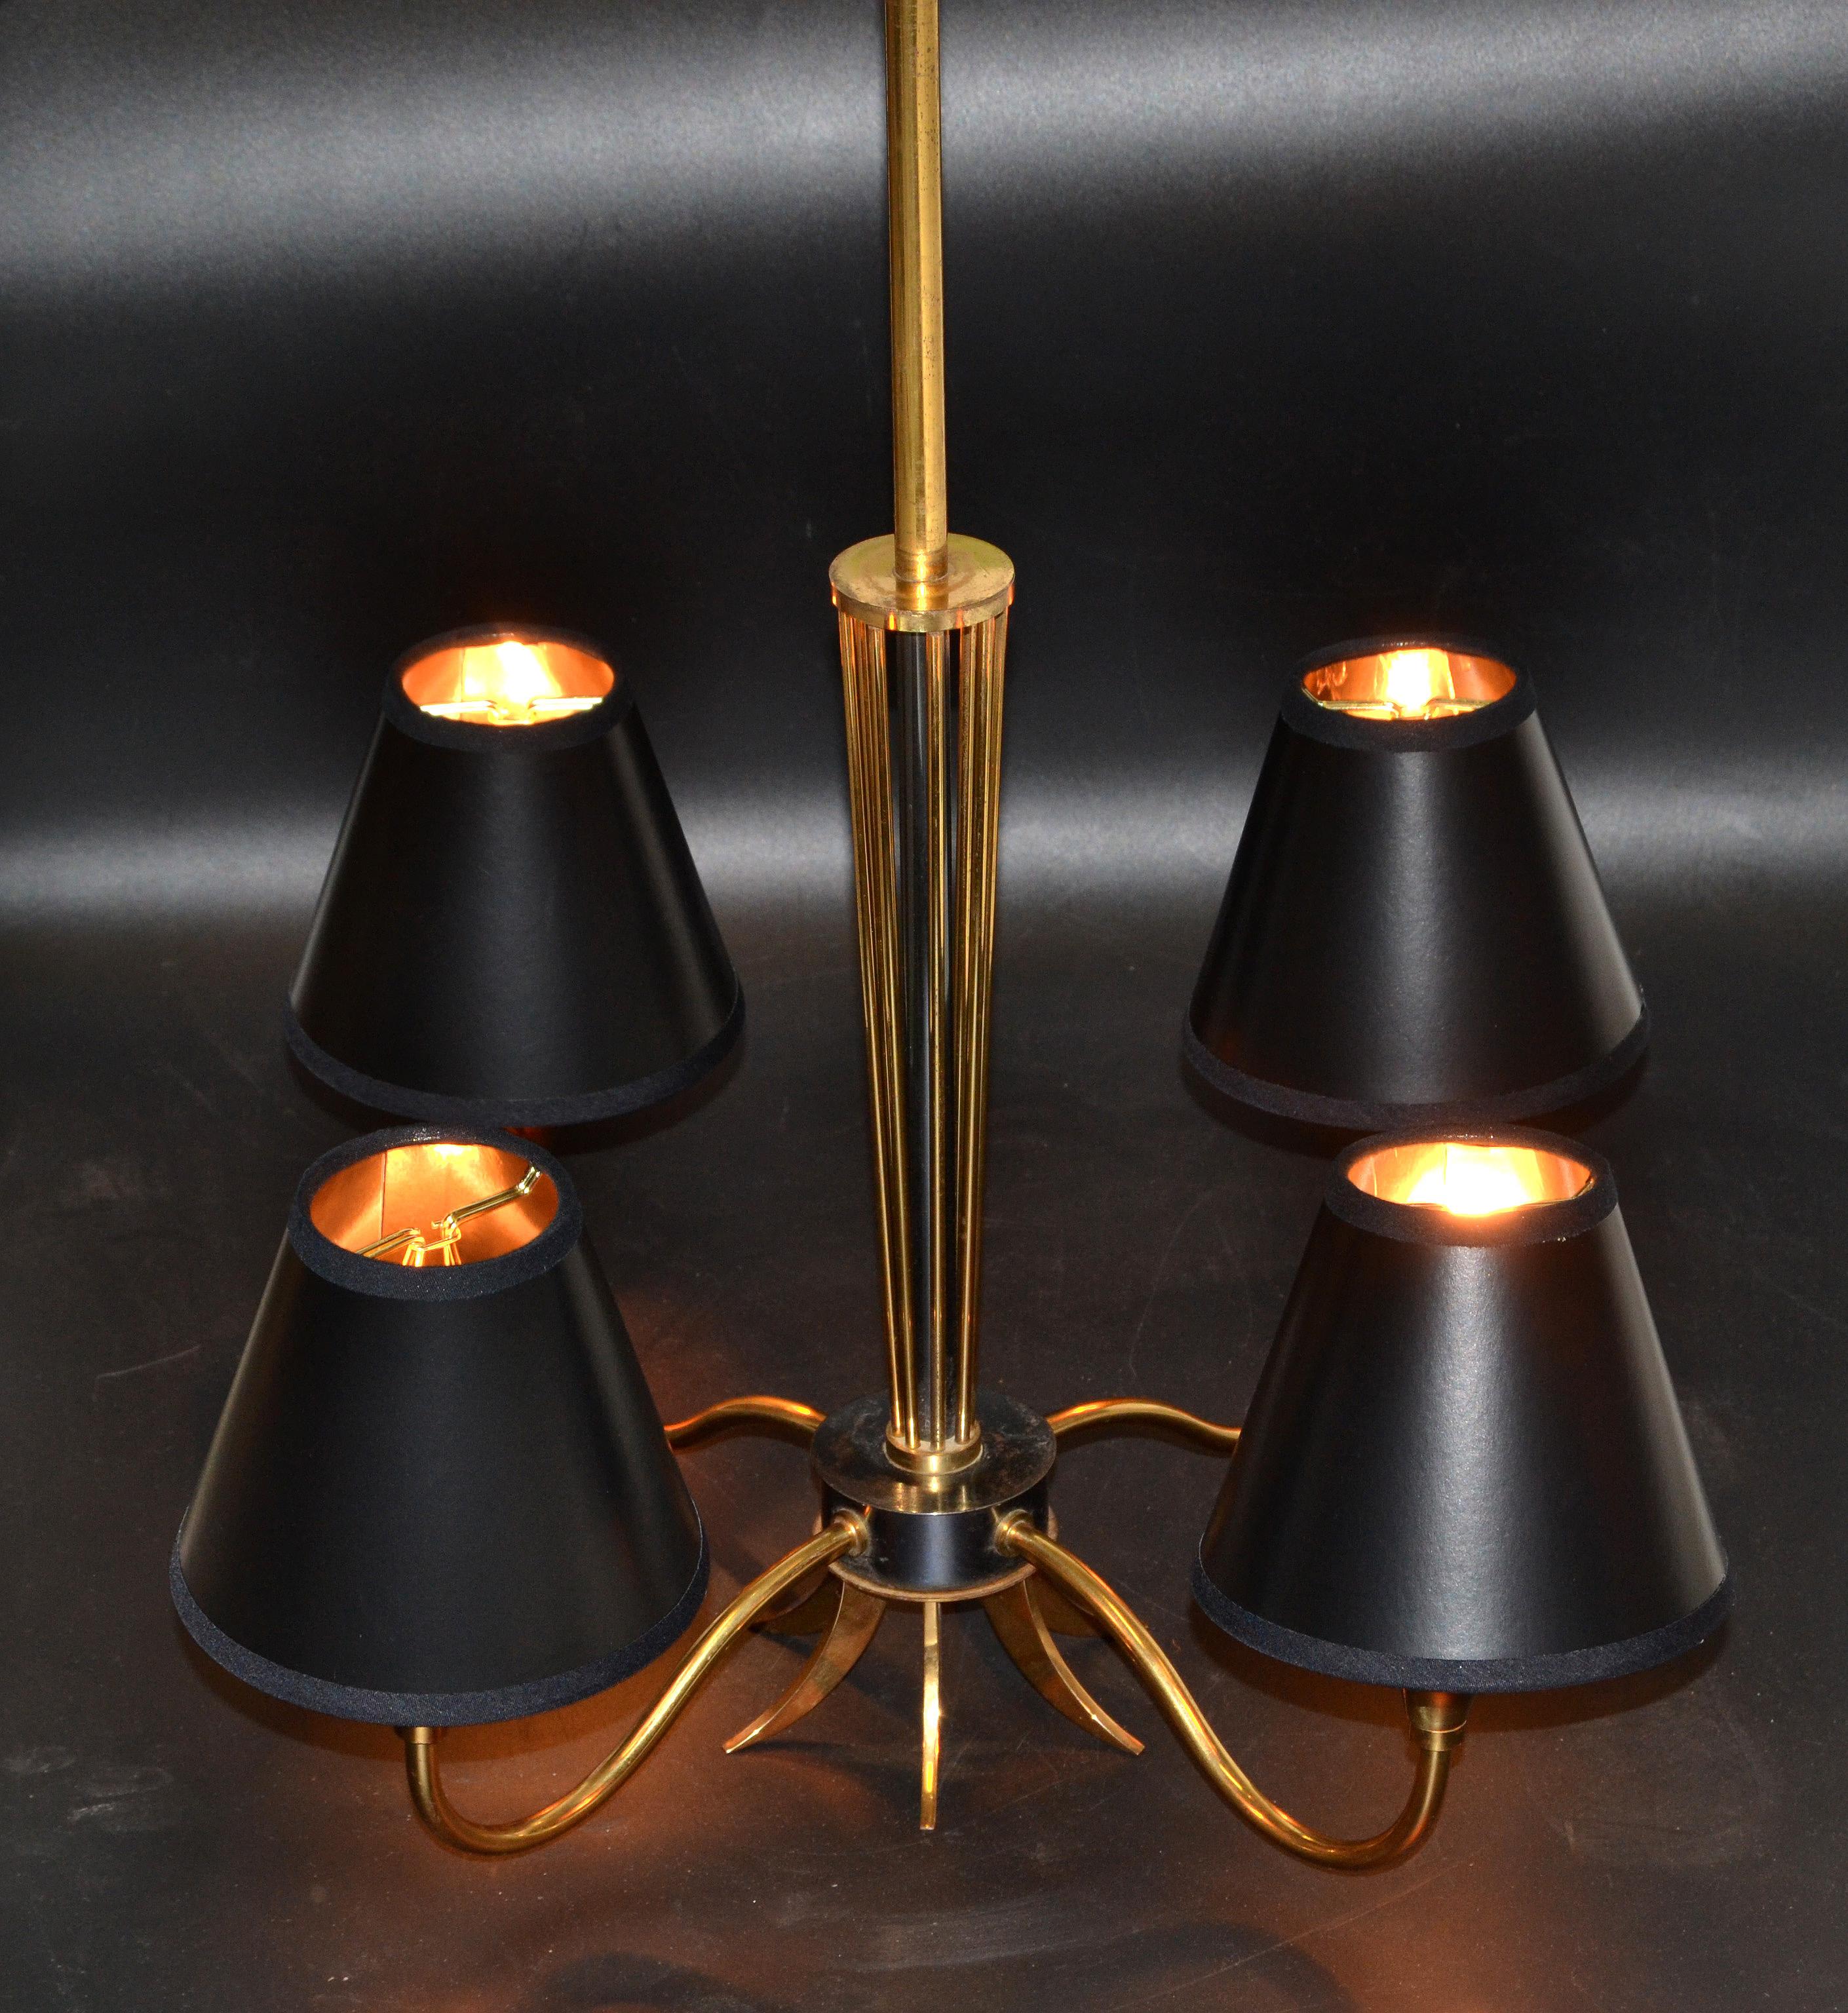 Patinated Maison Lunel Four-Light Chandelier Brass and Gun Metal French Mid-Century Modern